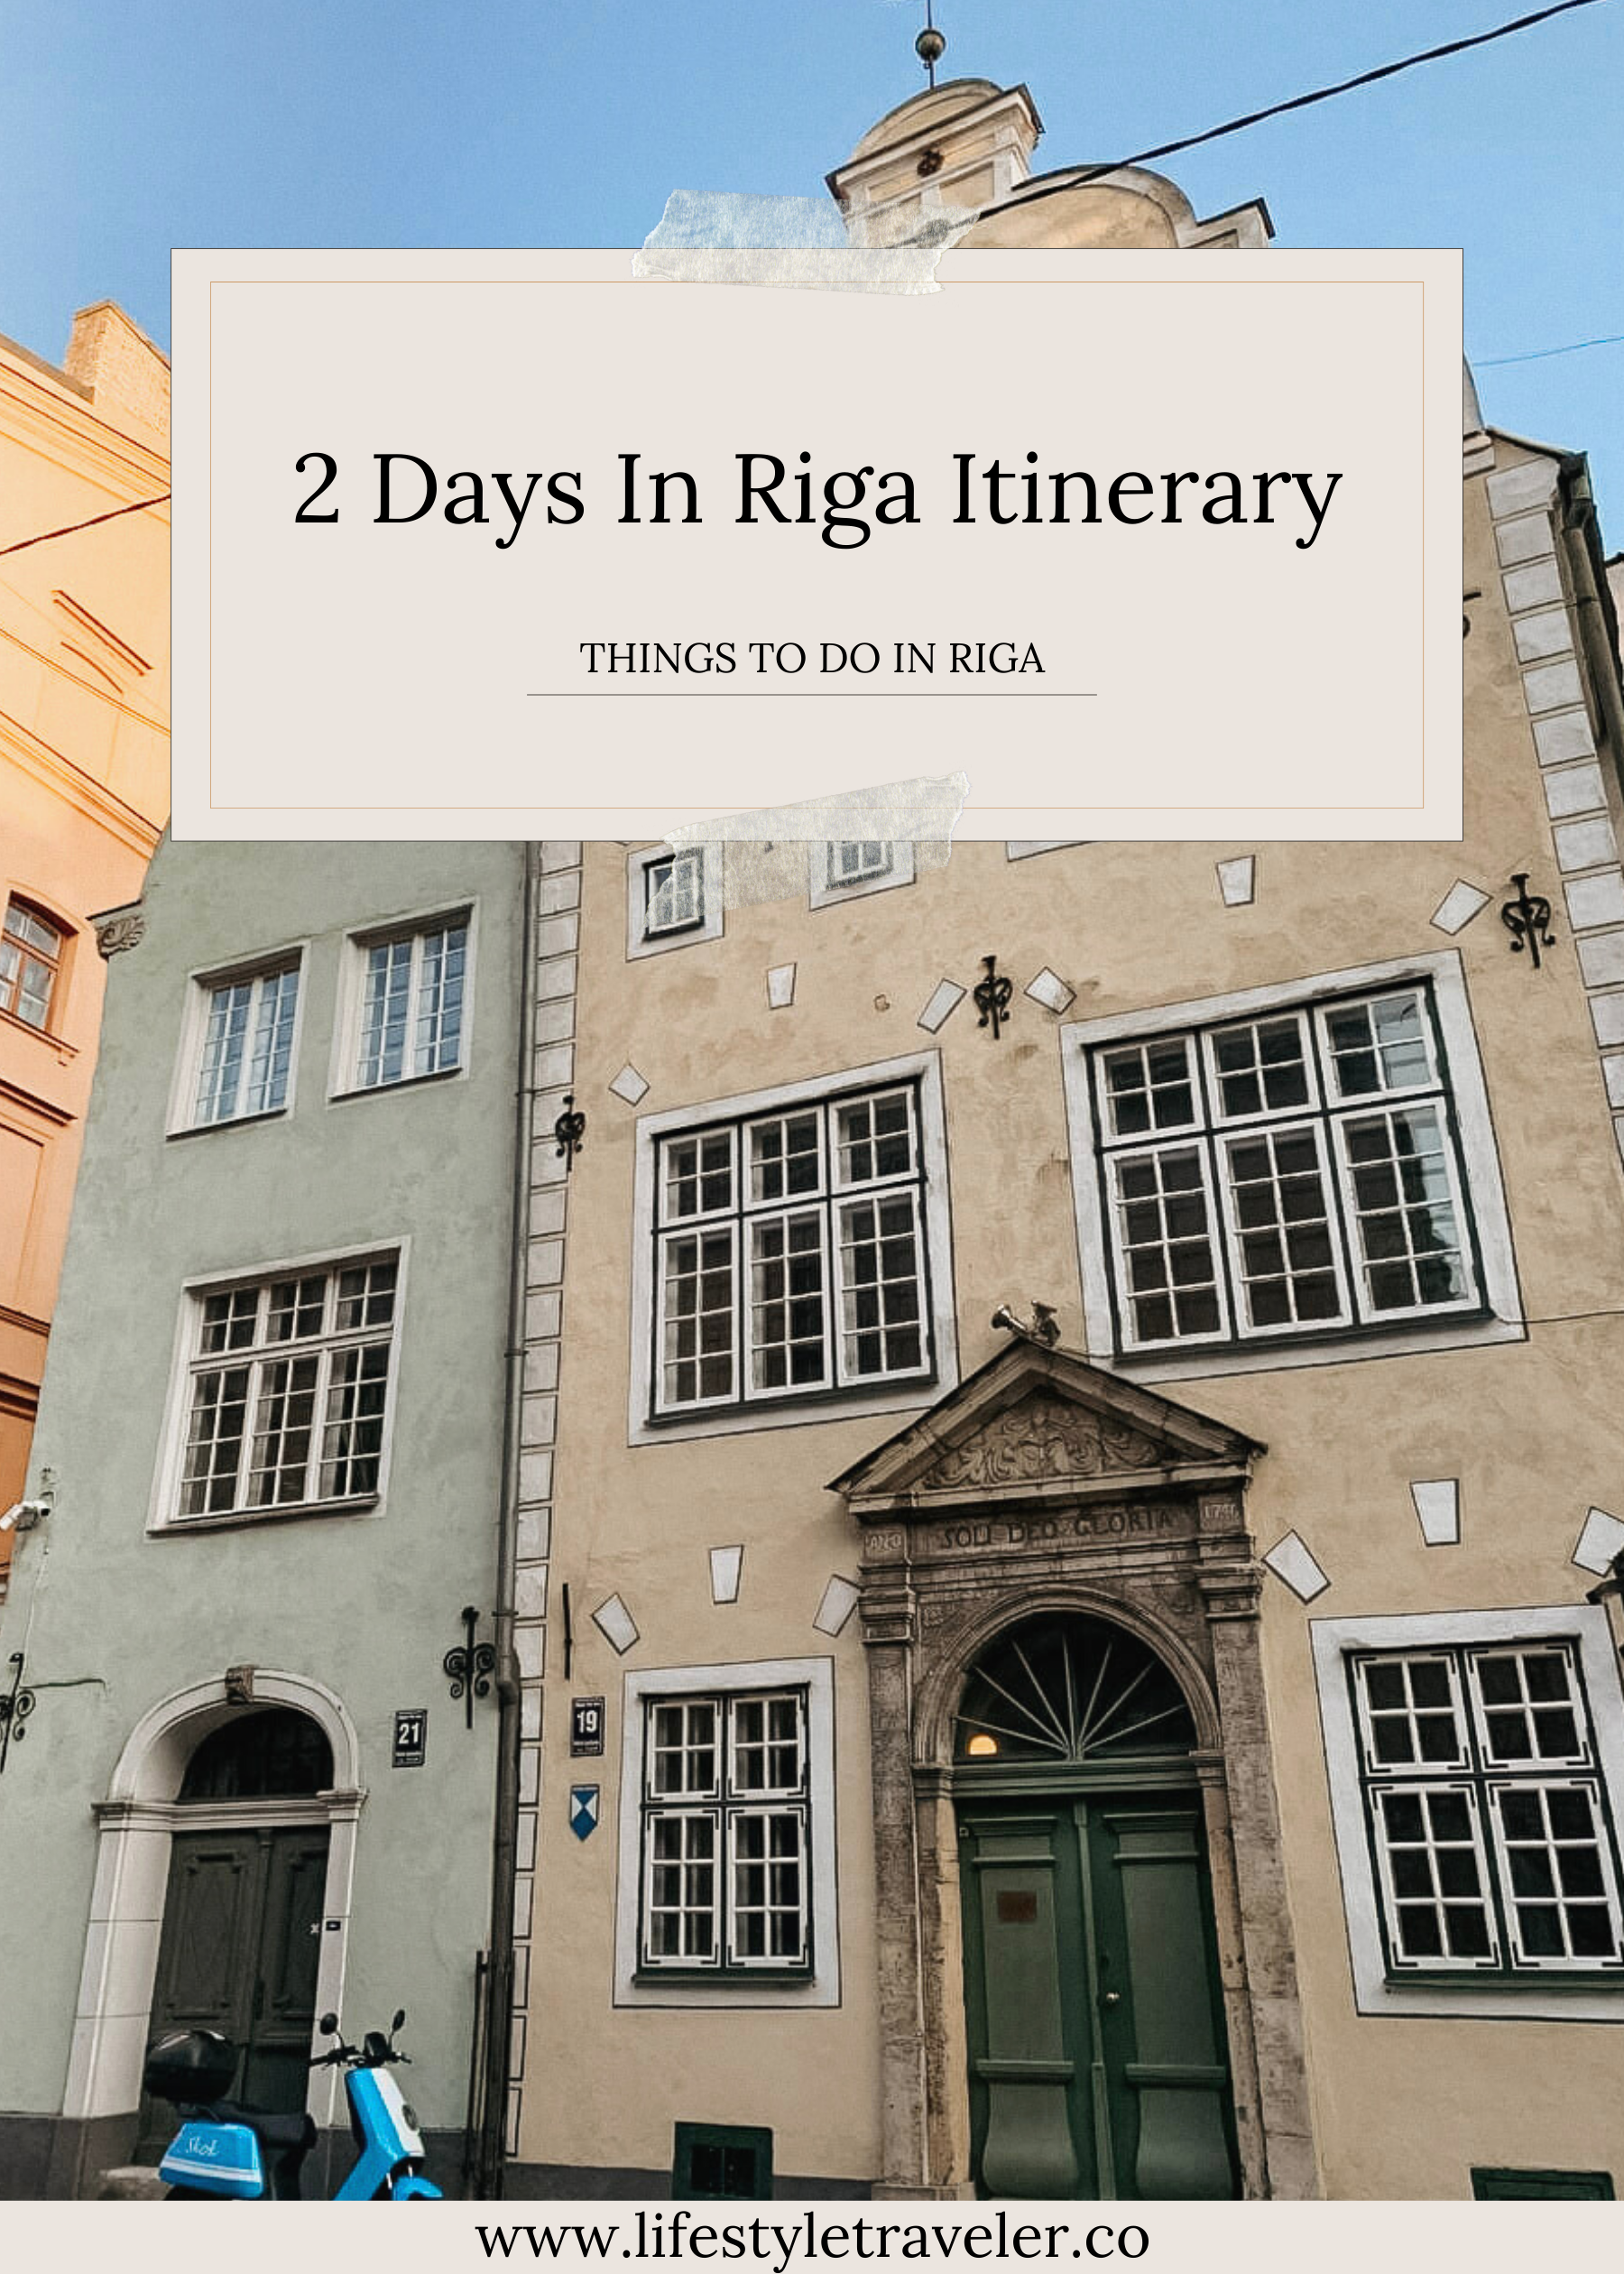 2 Days in Riga Itinerary: Things To Do In Latvia’s Capital | lifestyletraveler.co | IG: @lifestyletraveler.co 